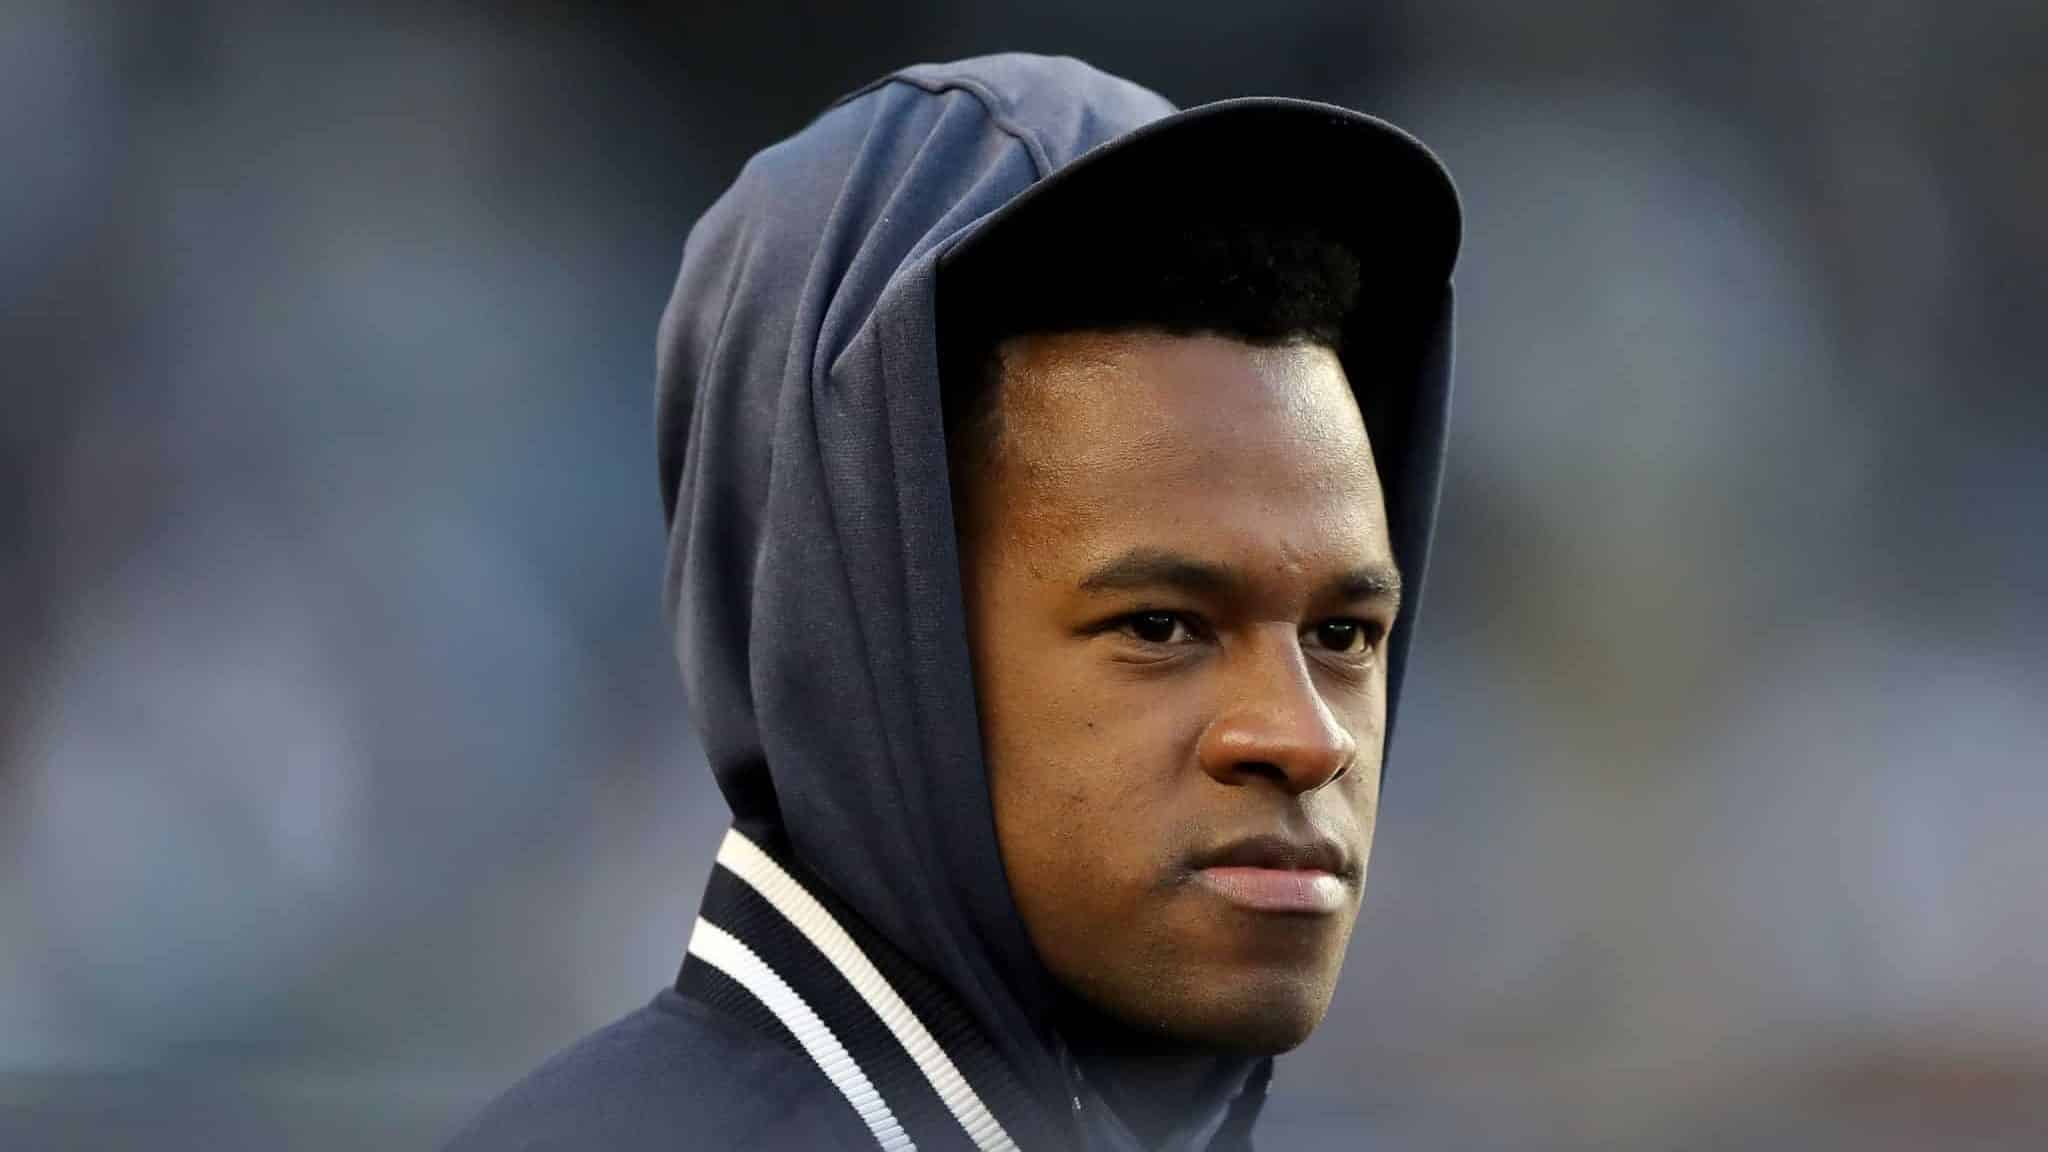 NEW YORK, NEW YORK - APRIL 17: Luis Severino #40 of the New York Yankees looks on from the dugout in the second inning against the Boston Red Sox at Yankee Stadium on April 17, 2019 in New York City.